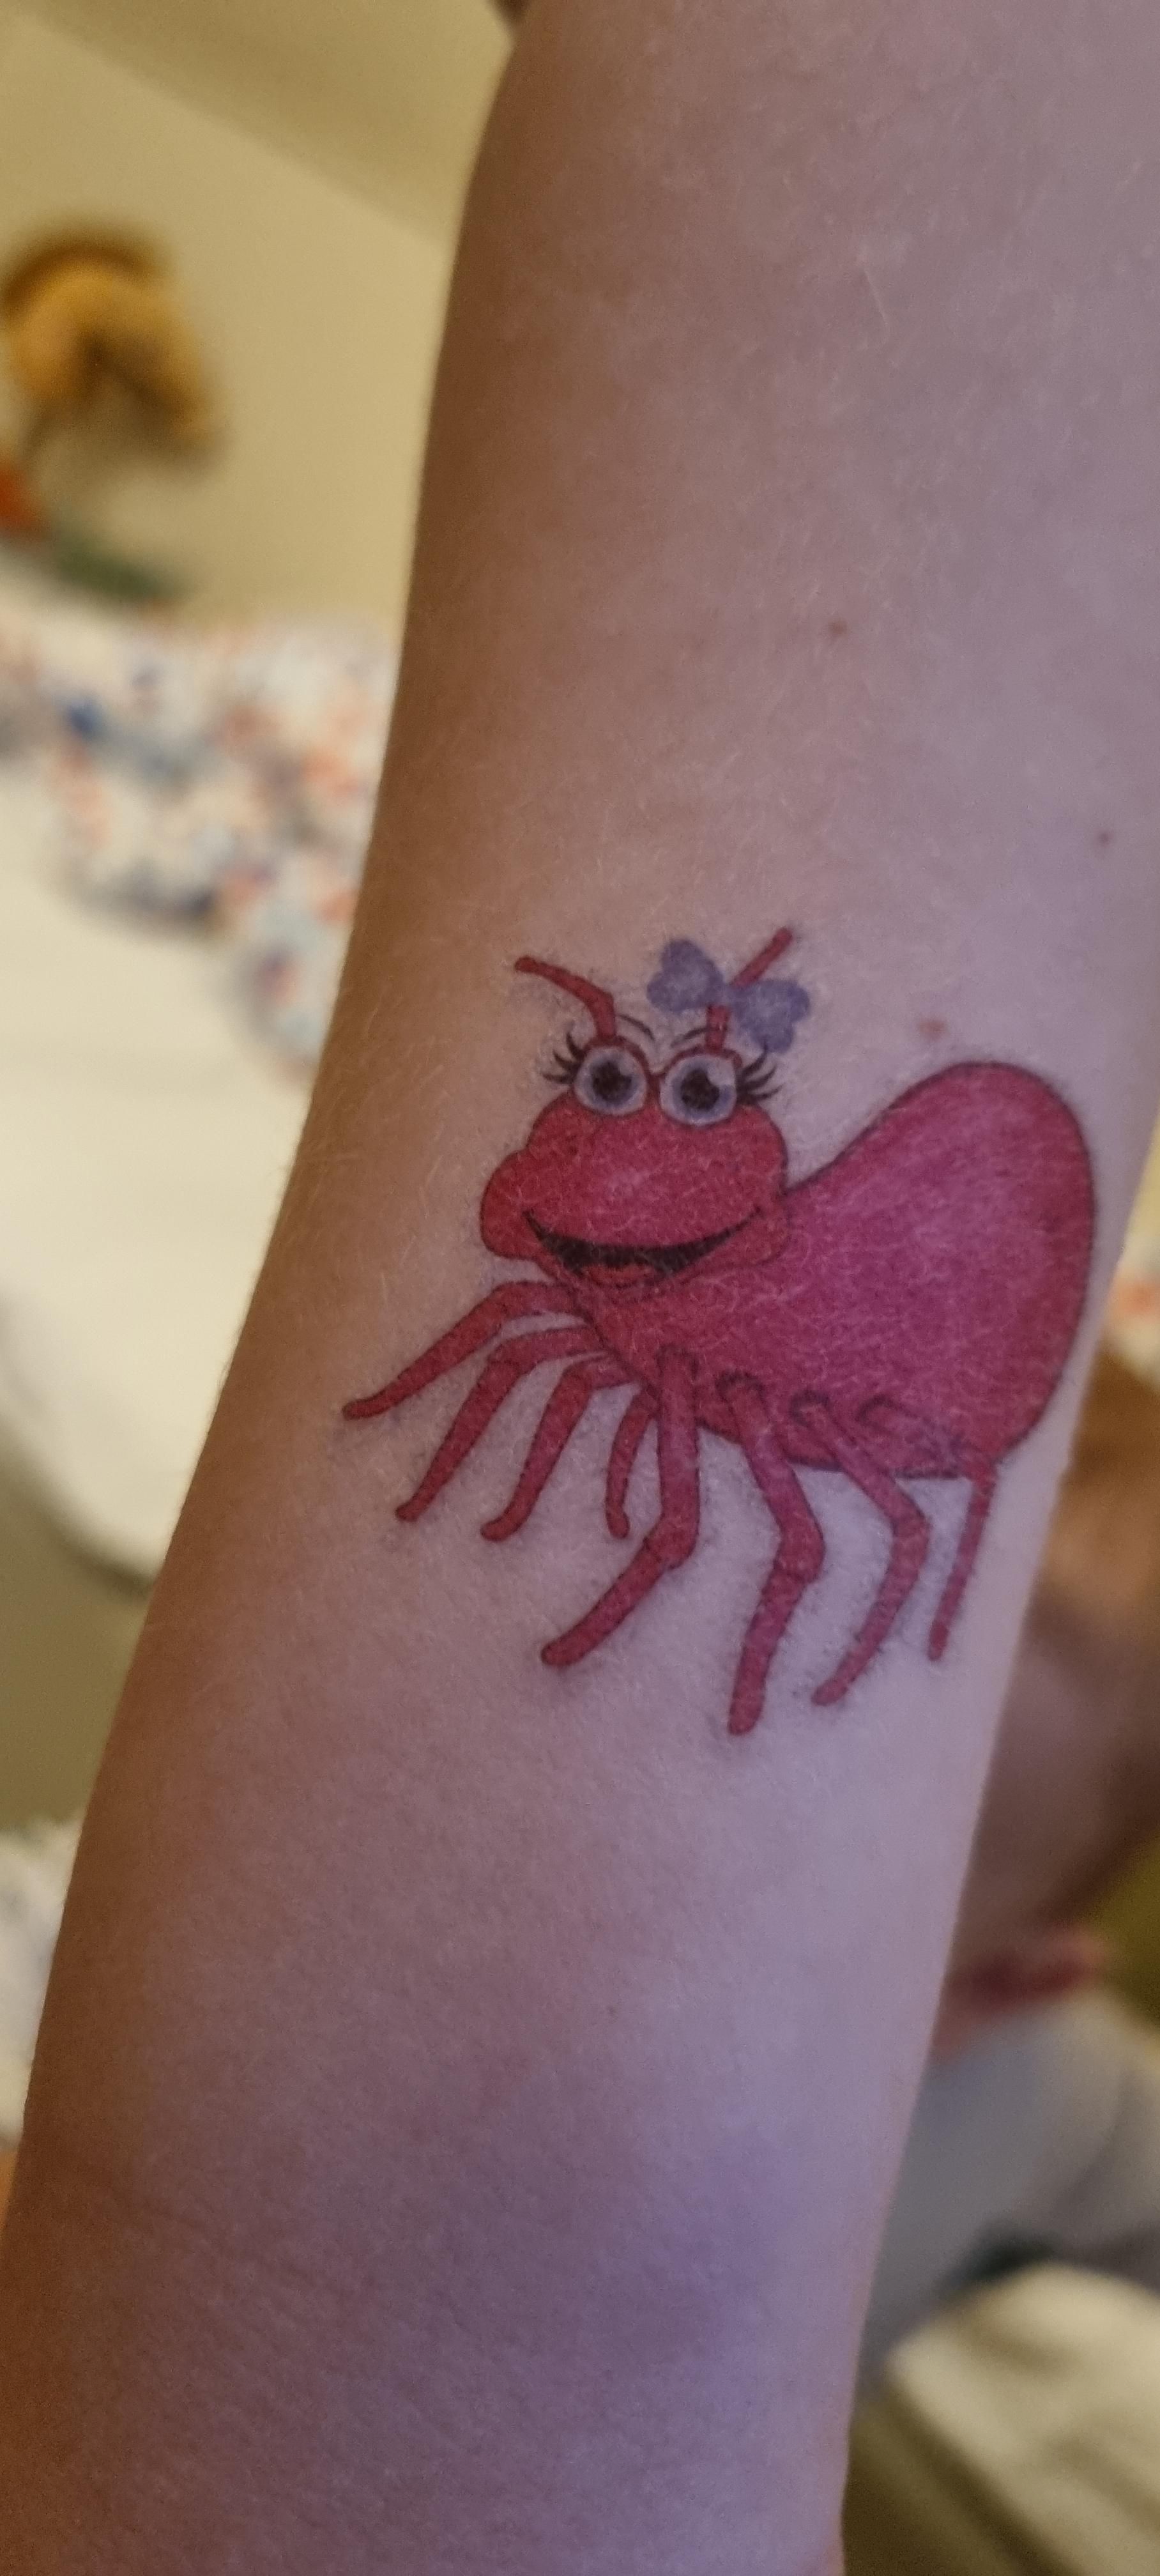 Out of hundreds of fake tattoos my daughter could have chosen after the dentist visit, she chose a tick...